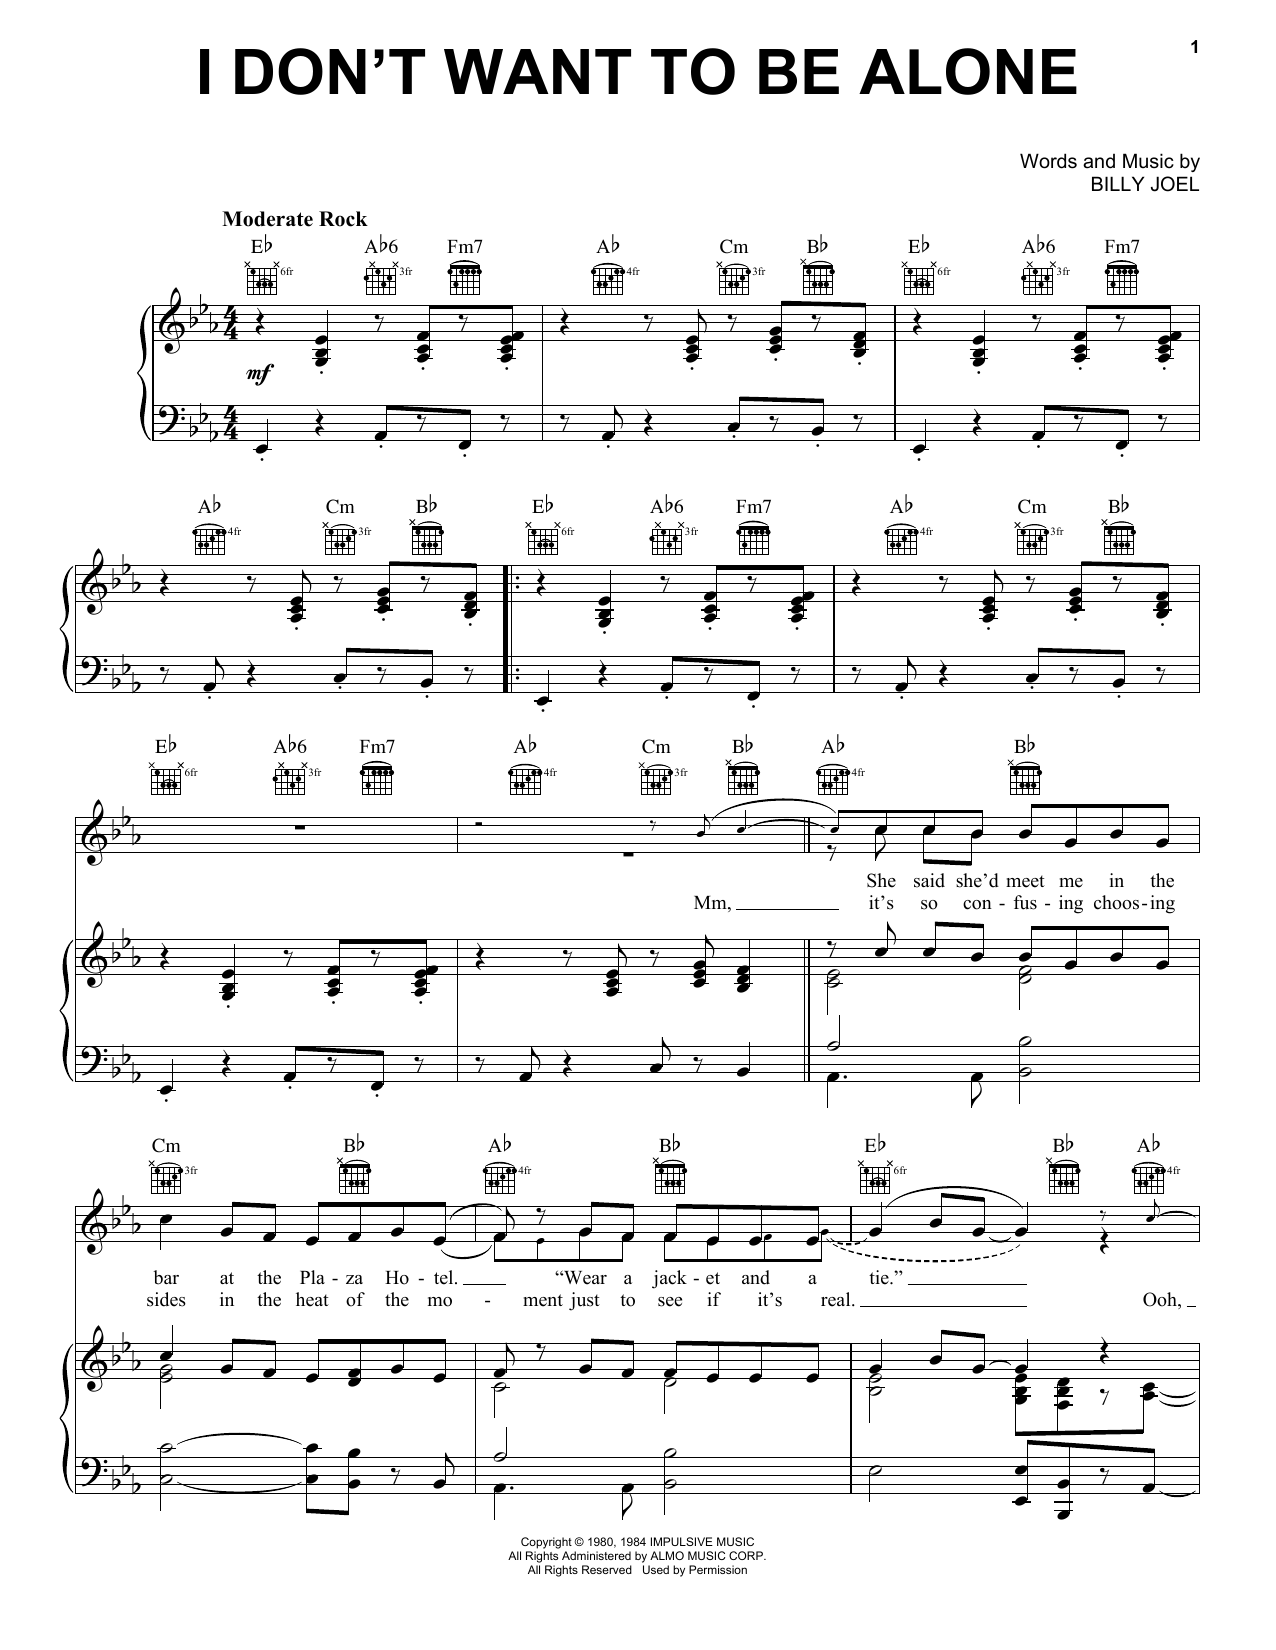 Download Billy Joel I Don't Want To Be Alone Sheet Music